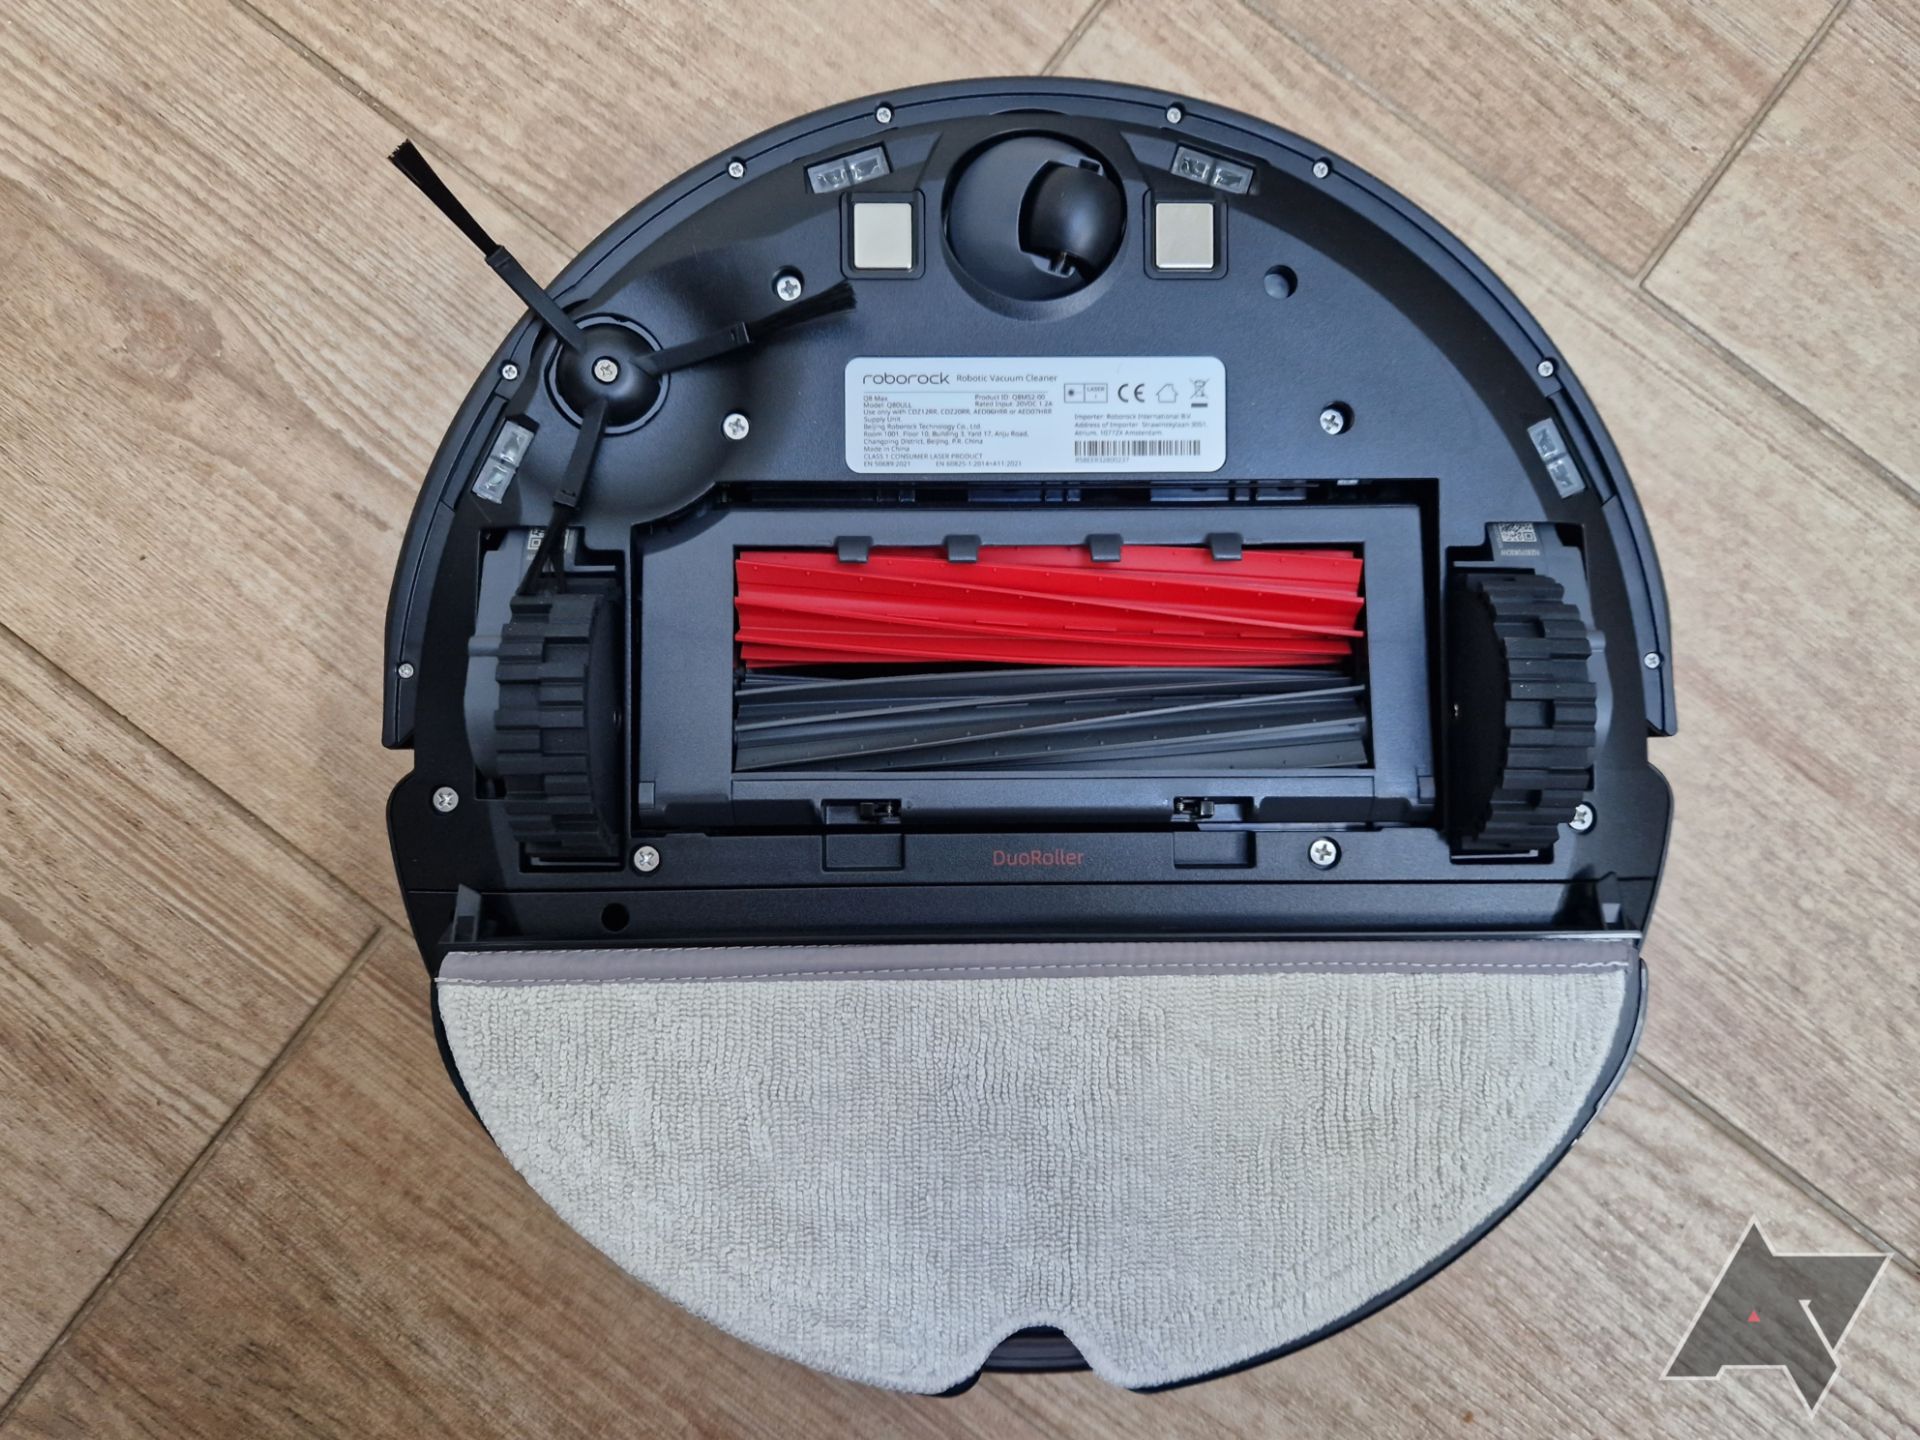 Roborock Q8 Max Robot Vacuum and Mop with Obstacle Avoidance, LiDAR  Navigation, 5500Pa Suction Power, and App Control 